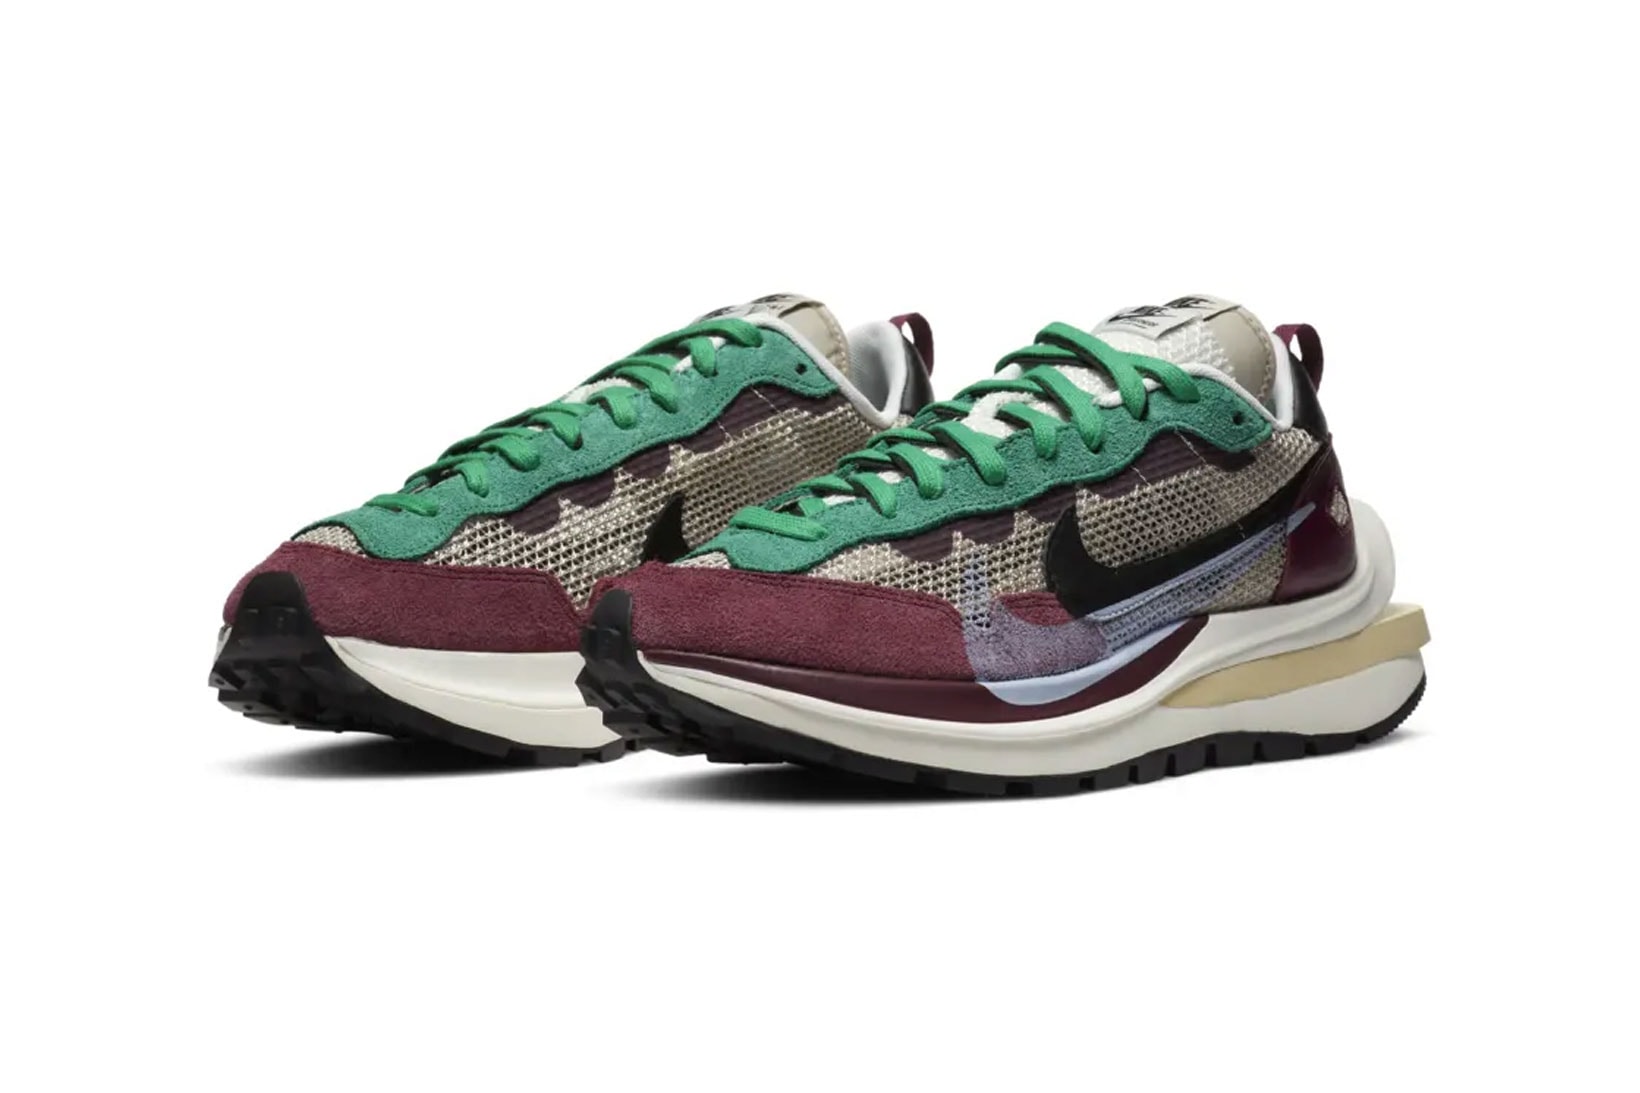 sacai nike vaporwaffle tour yellow green string black villain red official look price release date chitose abe